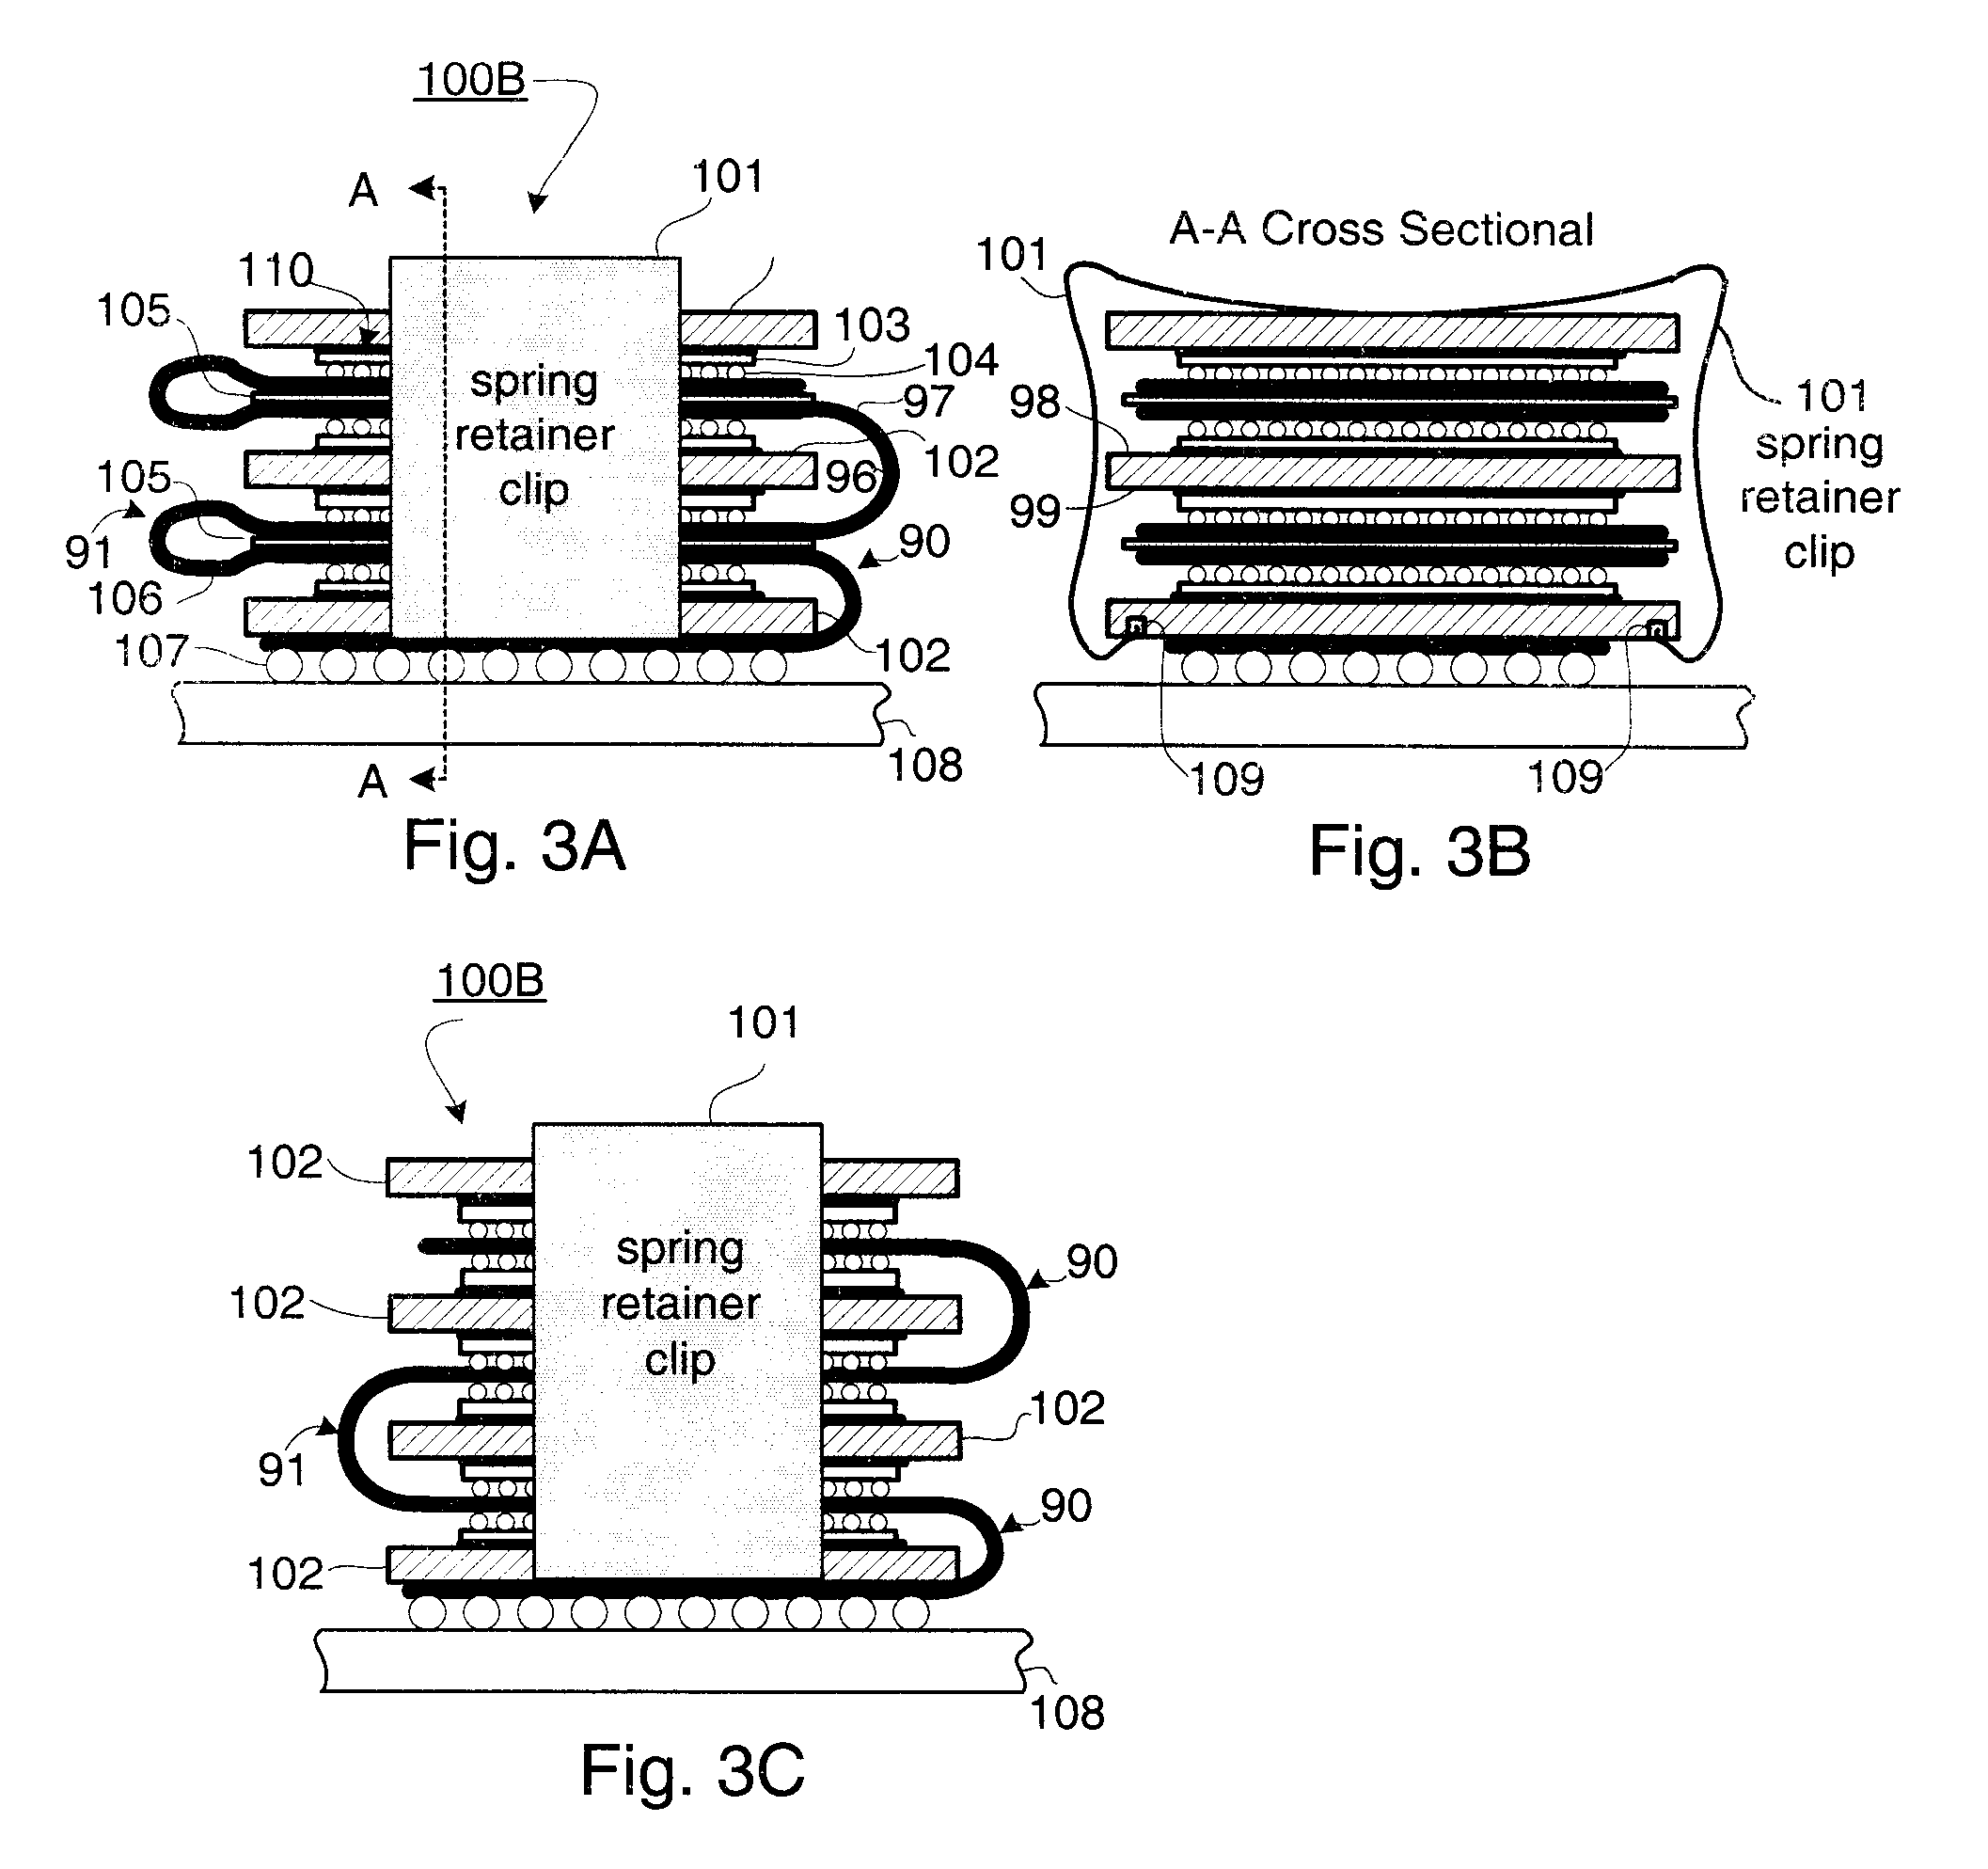 Method and Structure for Connecting, Stacking, and Cooling Chips on a Flexible Carrier